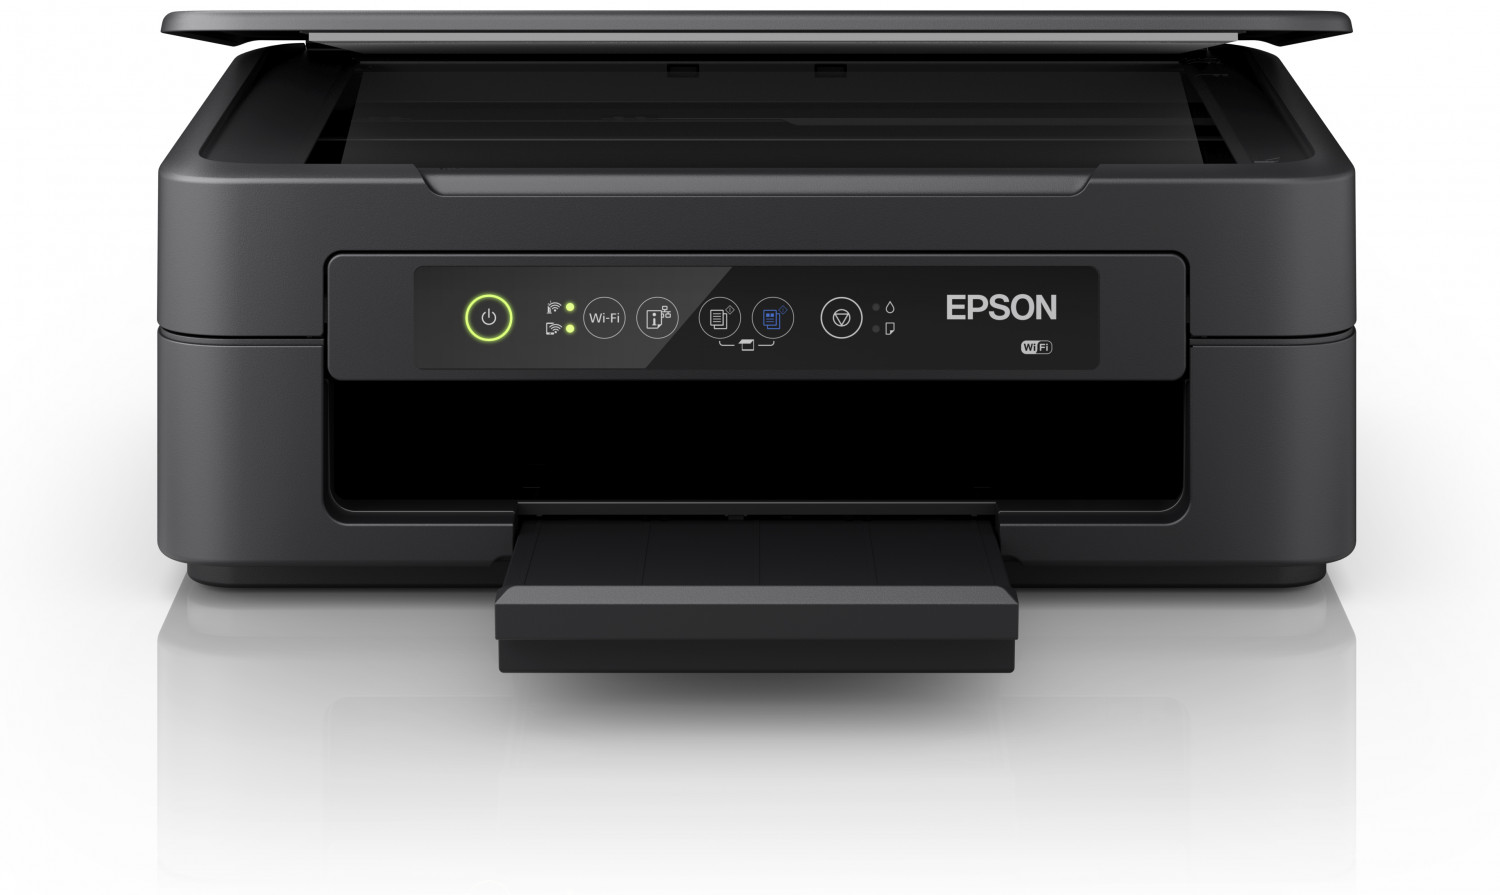 Step-by-step Printer Epson XP-2100/XP-2101/XP-2105 Linux Mint Installation Guide - Featured